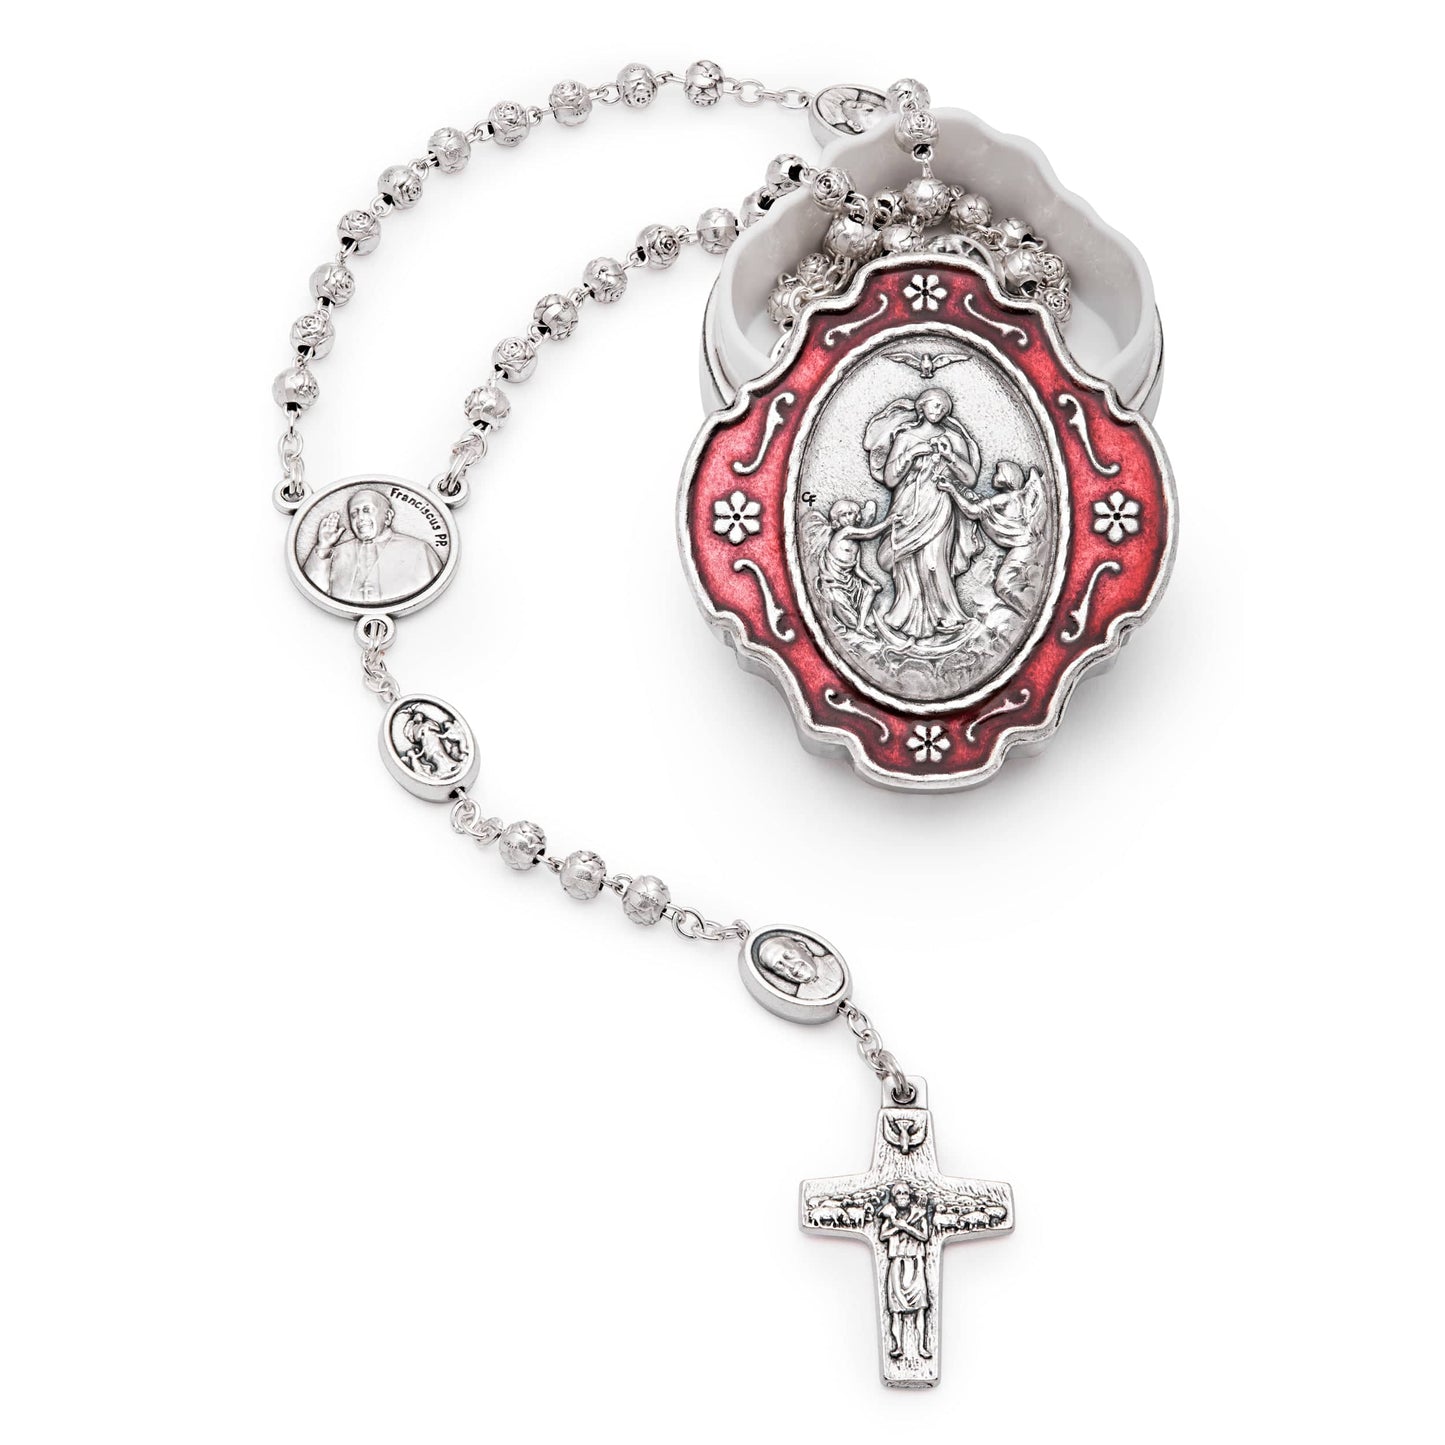 MONDO CATTOLICO Prayer Beads 35 cm (13.77 in) / 4 mm (0.15 in) Mary Undoer the Knots Rosary with Red Holder